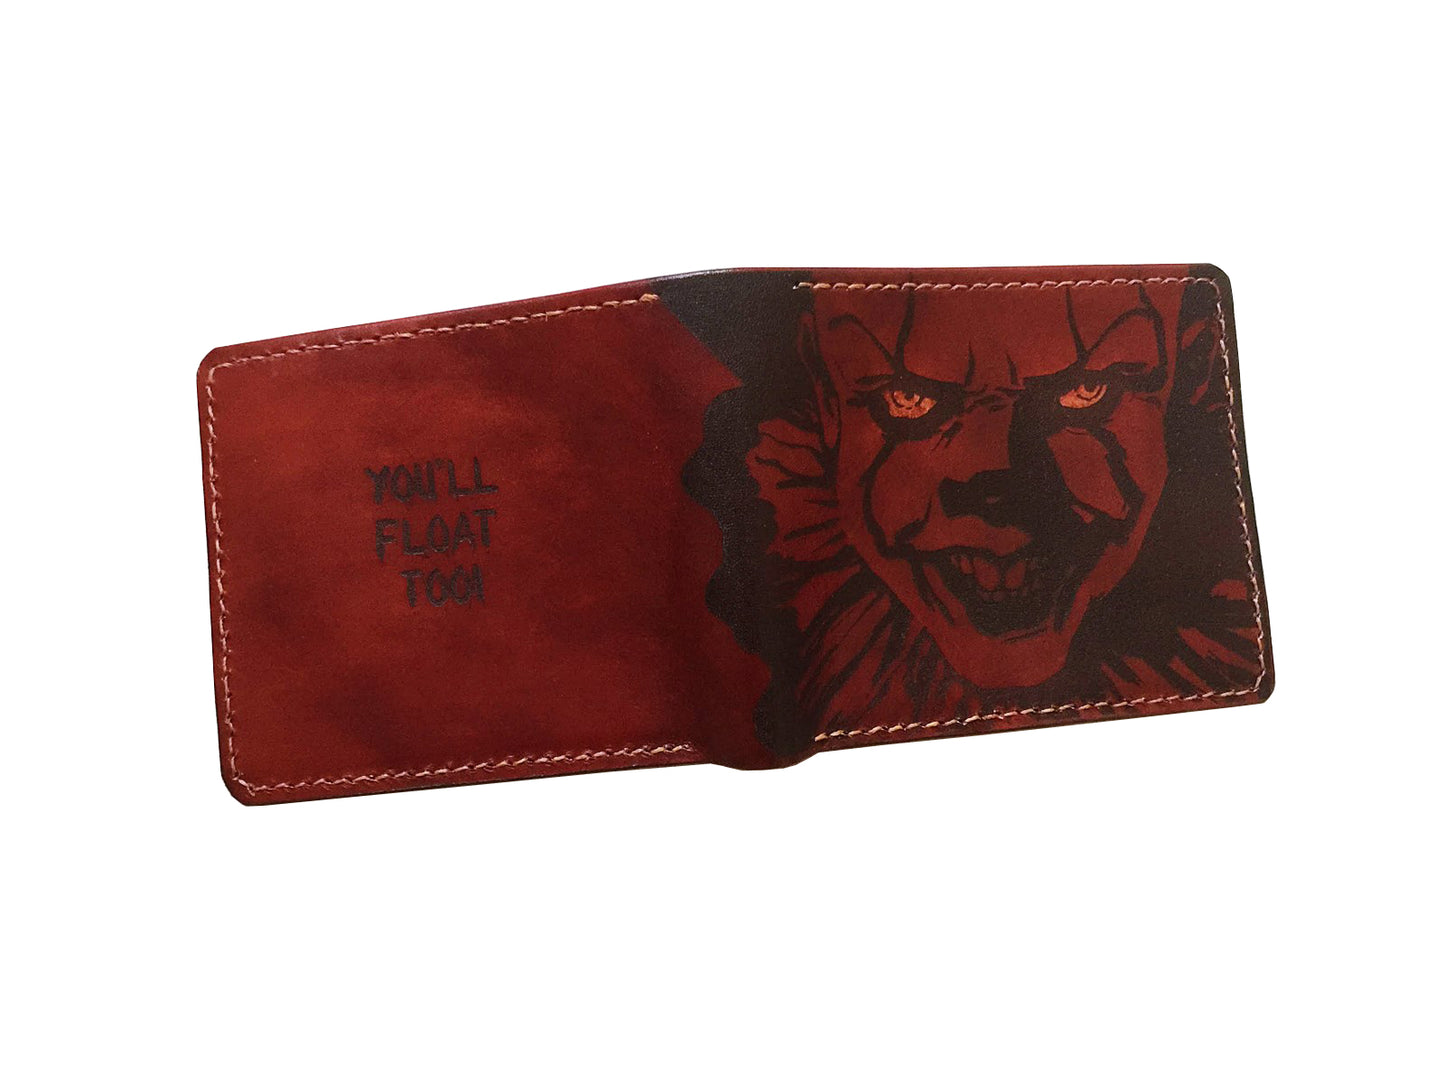 Mayan Corner - Pennywise IT halloween horror leather handmade men's wallet, horror movie men's present, personalized horror gifts for him, father, husband